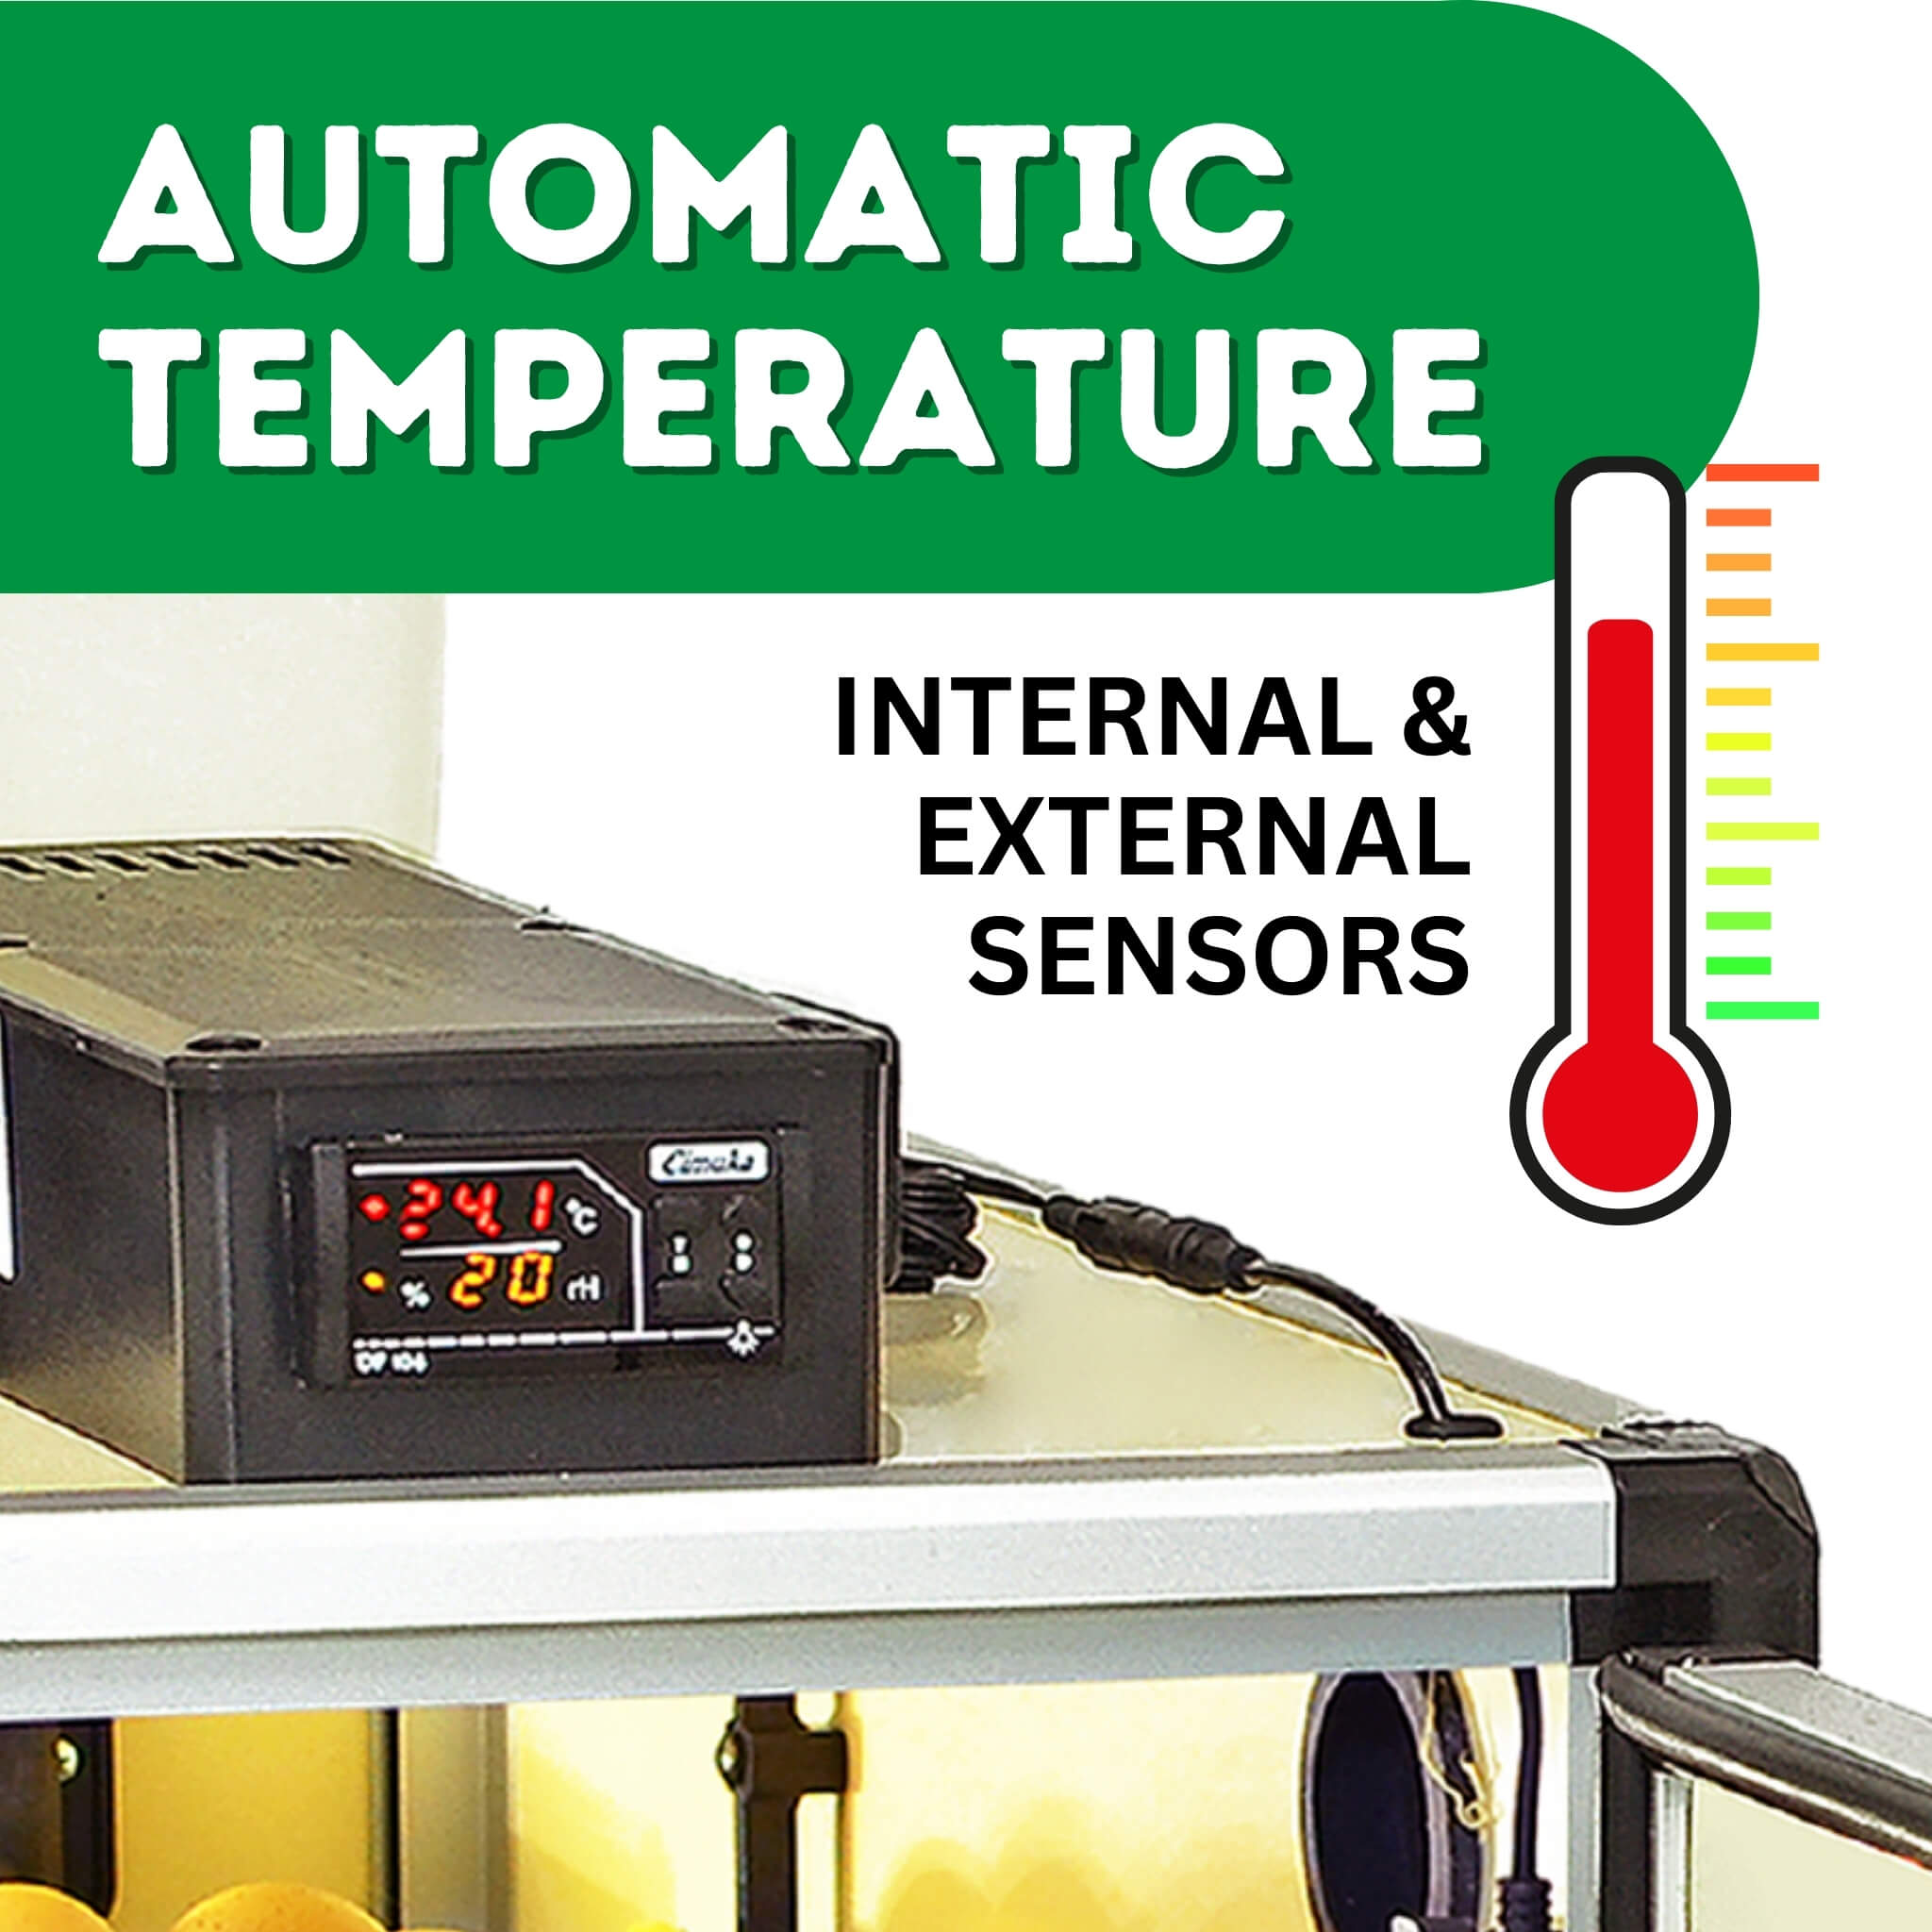 CT60SH Egg Incubator comes with automatic temperature controls and sensors for internal and external parameters.